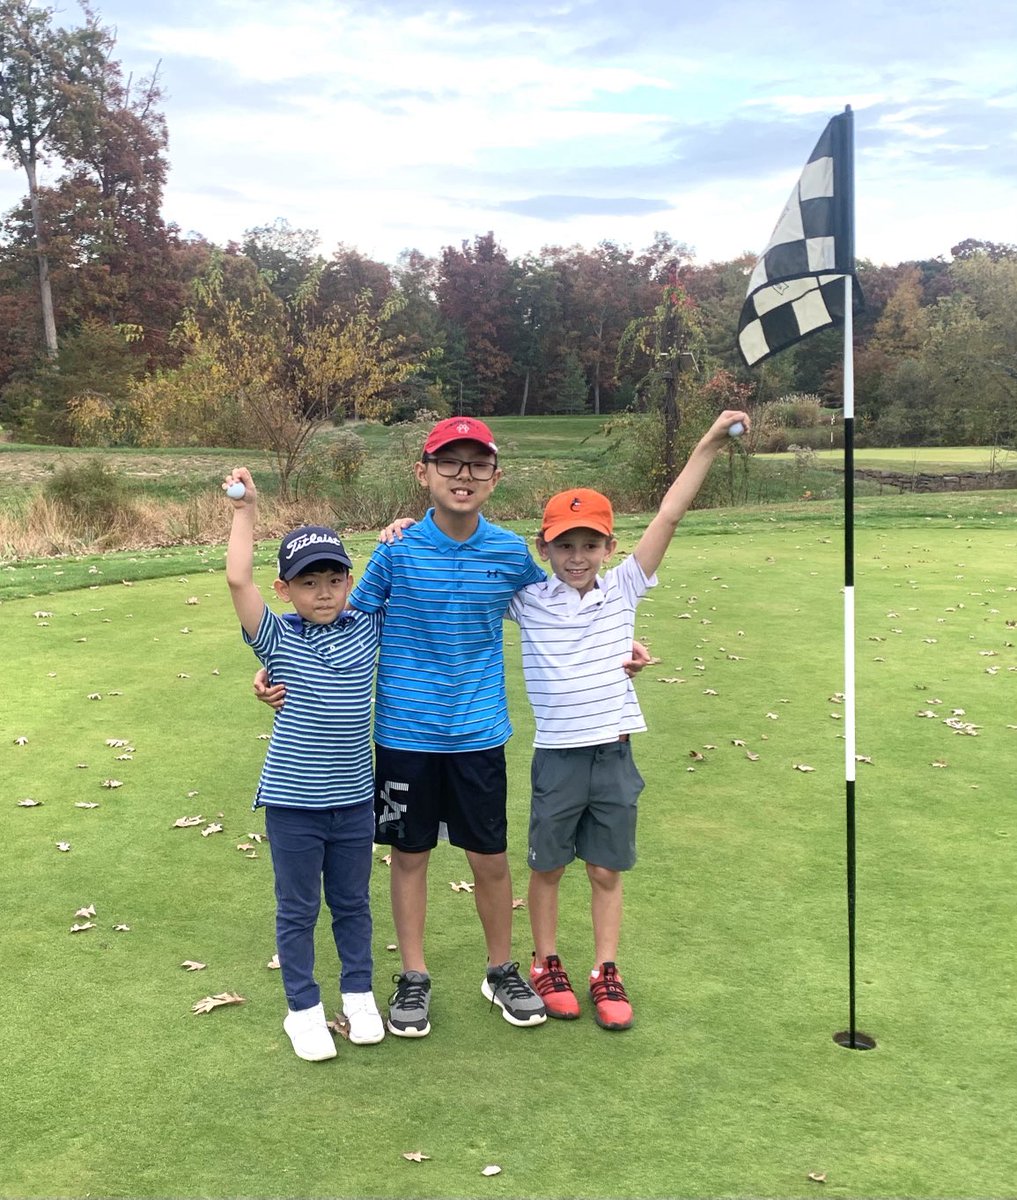 The Birdie Boys 

Each of these fine young men scored a birdie in their final 9 hole round of our fall semester of Operation 36 at The Virginia Golf Center.
 
Josiah scored 2! One to open his round and one to finish.
 
We’ll done!

#operation36 #juniorgolf